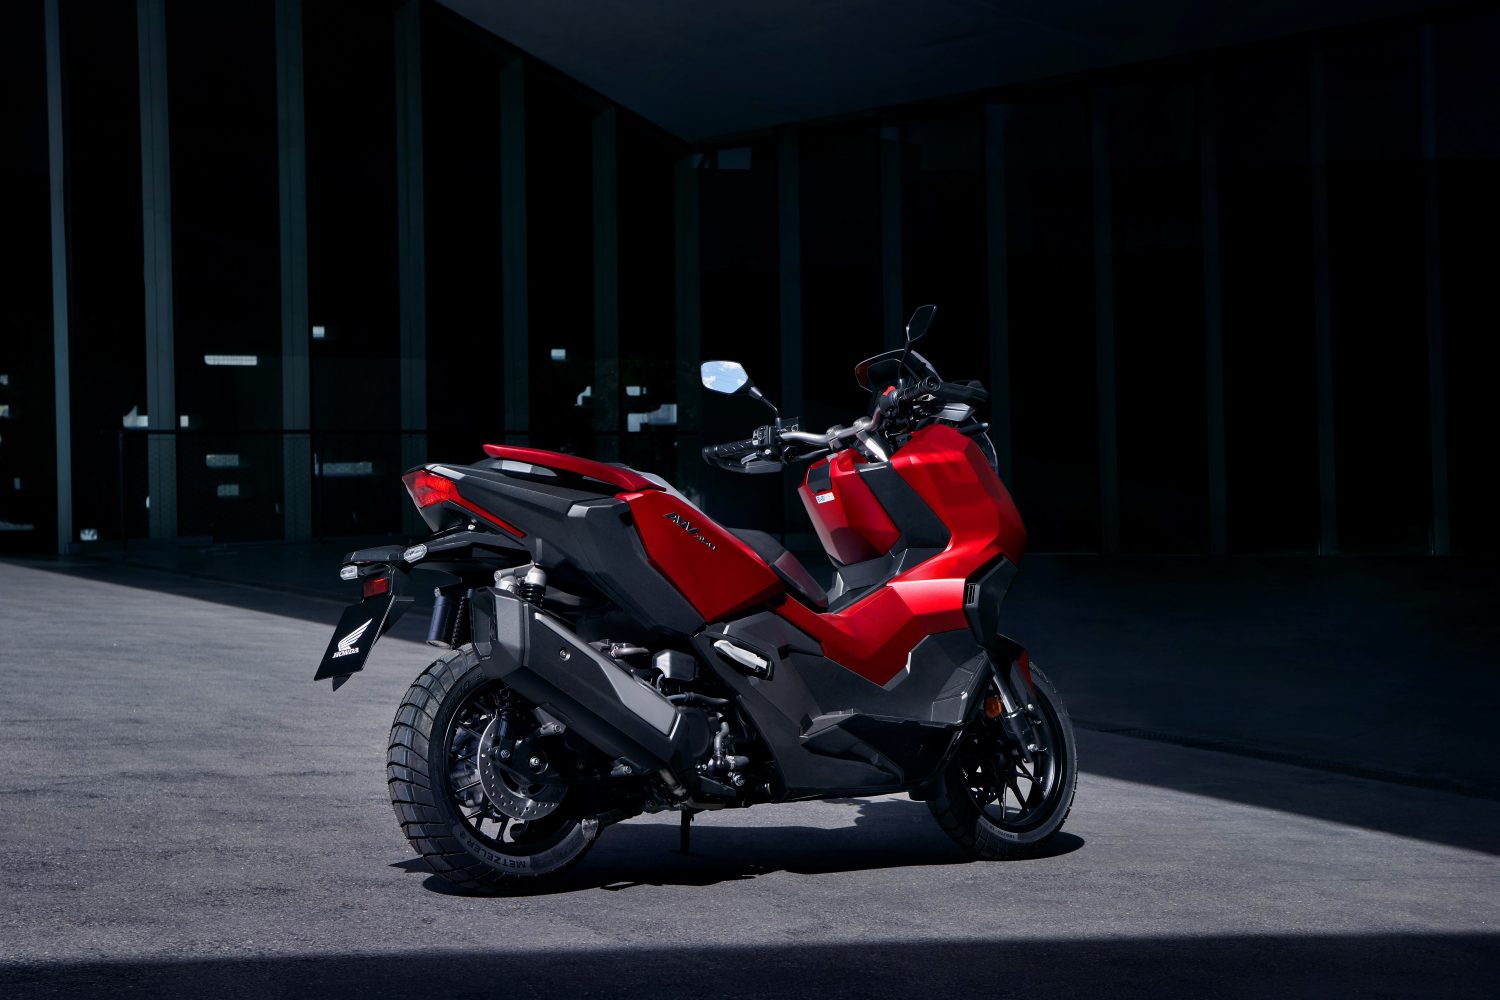 The Honda ADV 350 is already priced and competitive